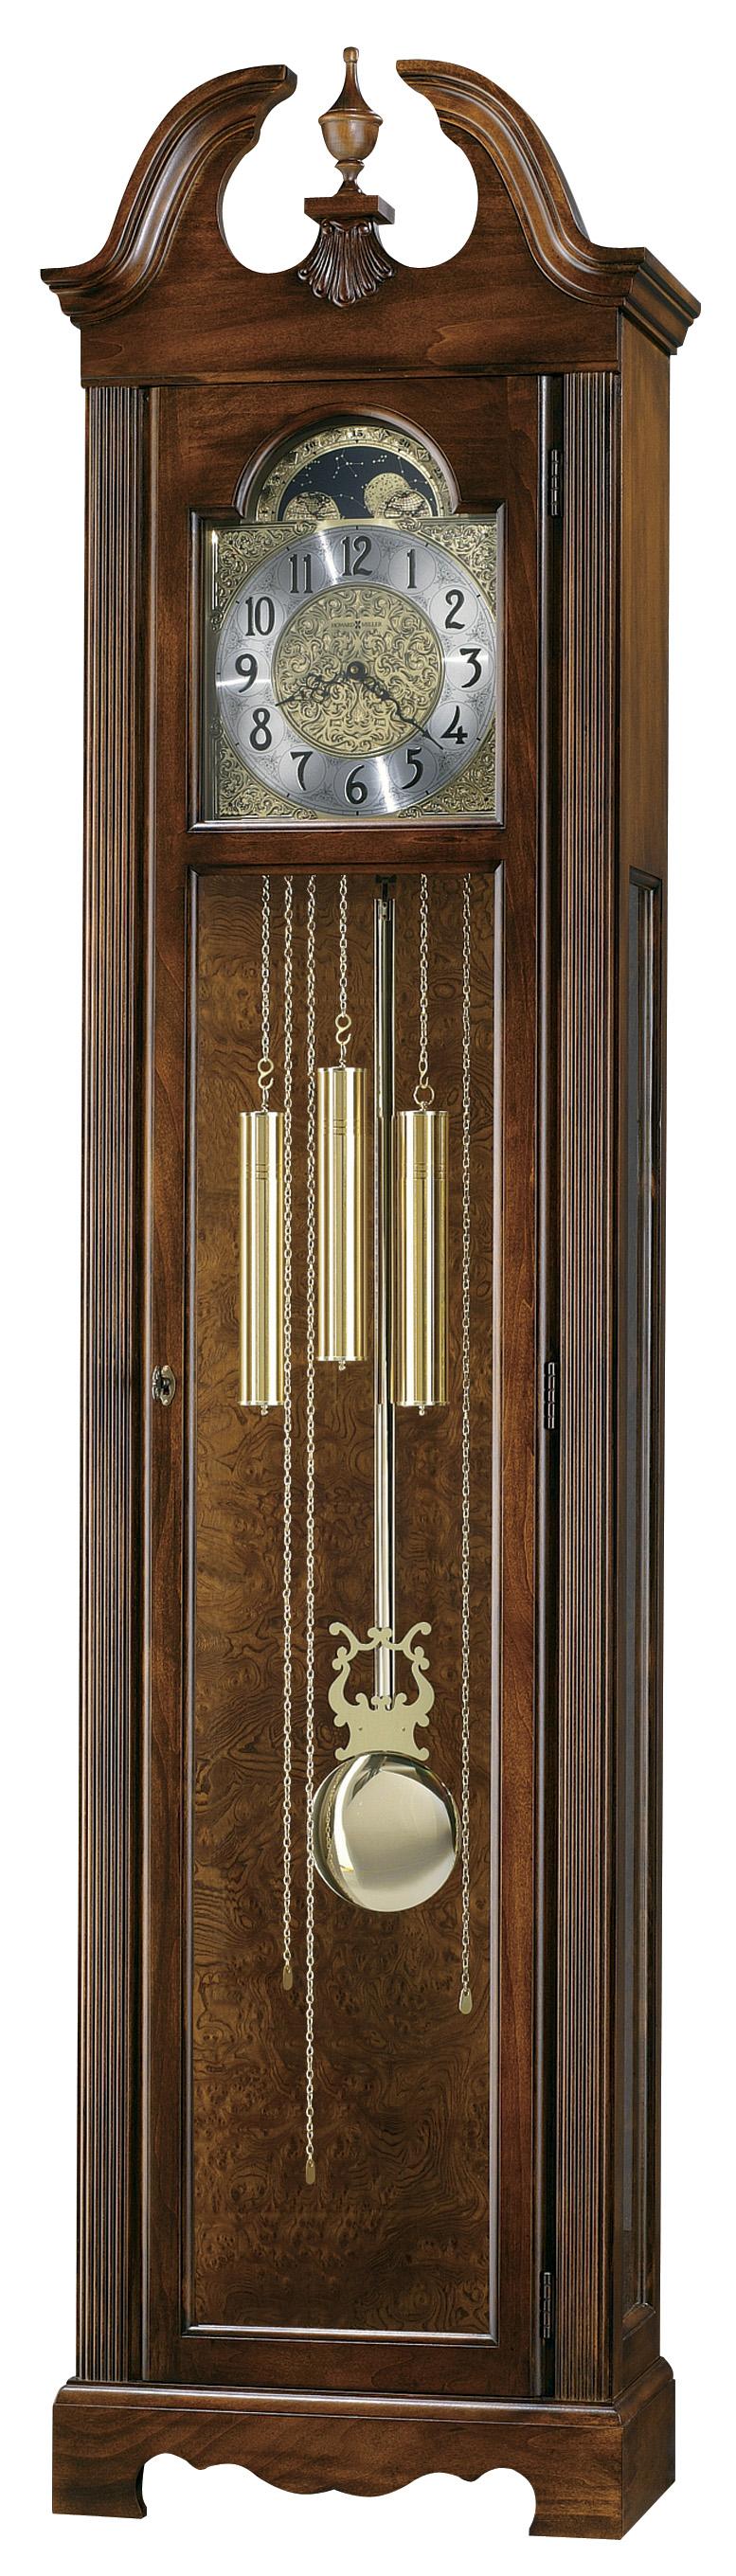 Princeton Grandfather Clock with Polished Brass Dial